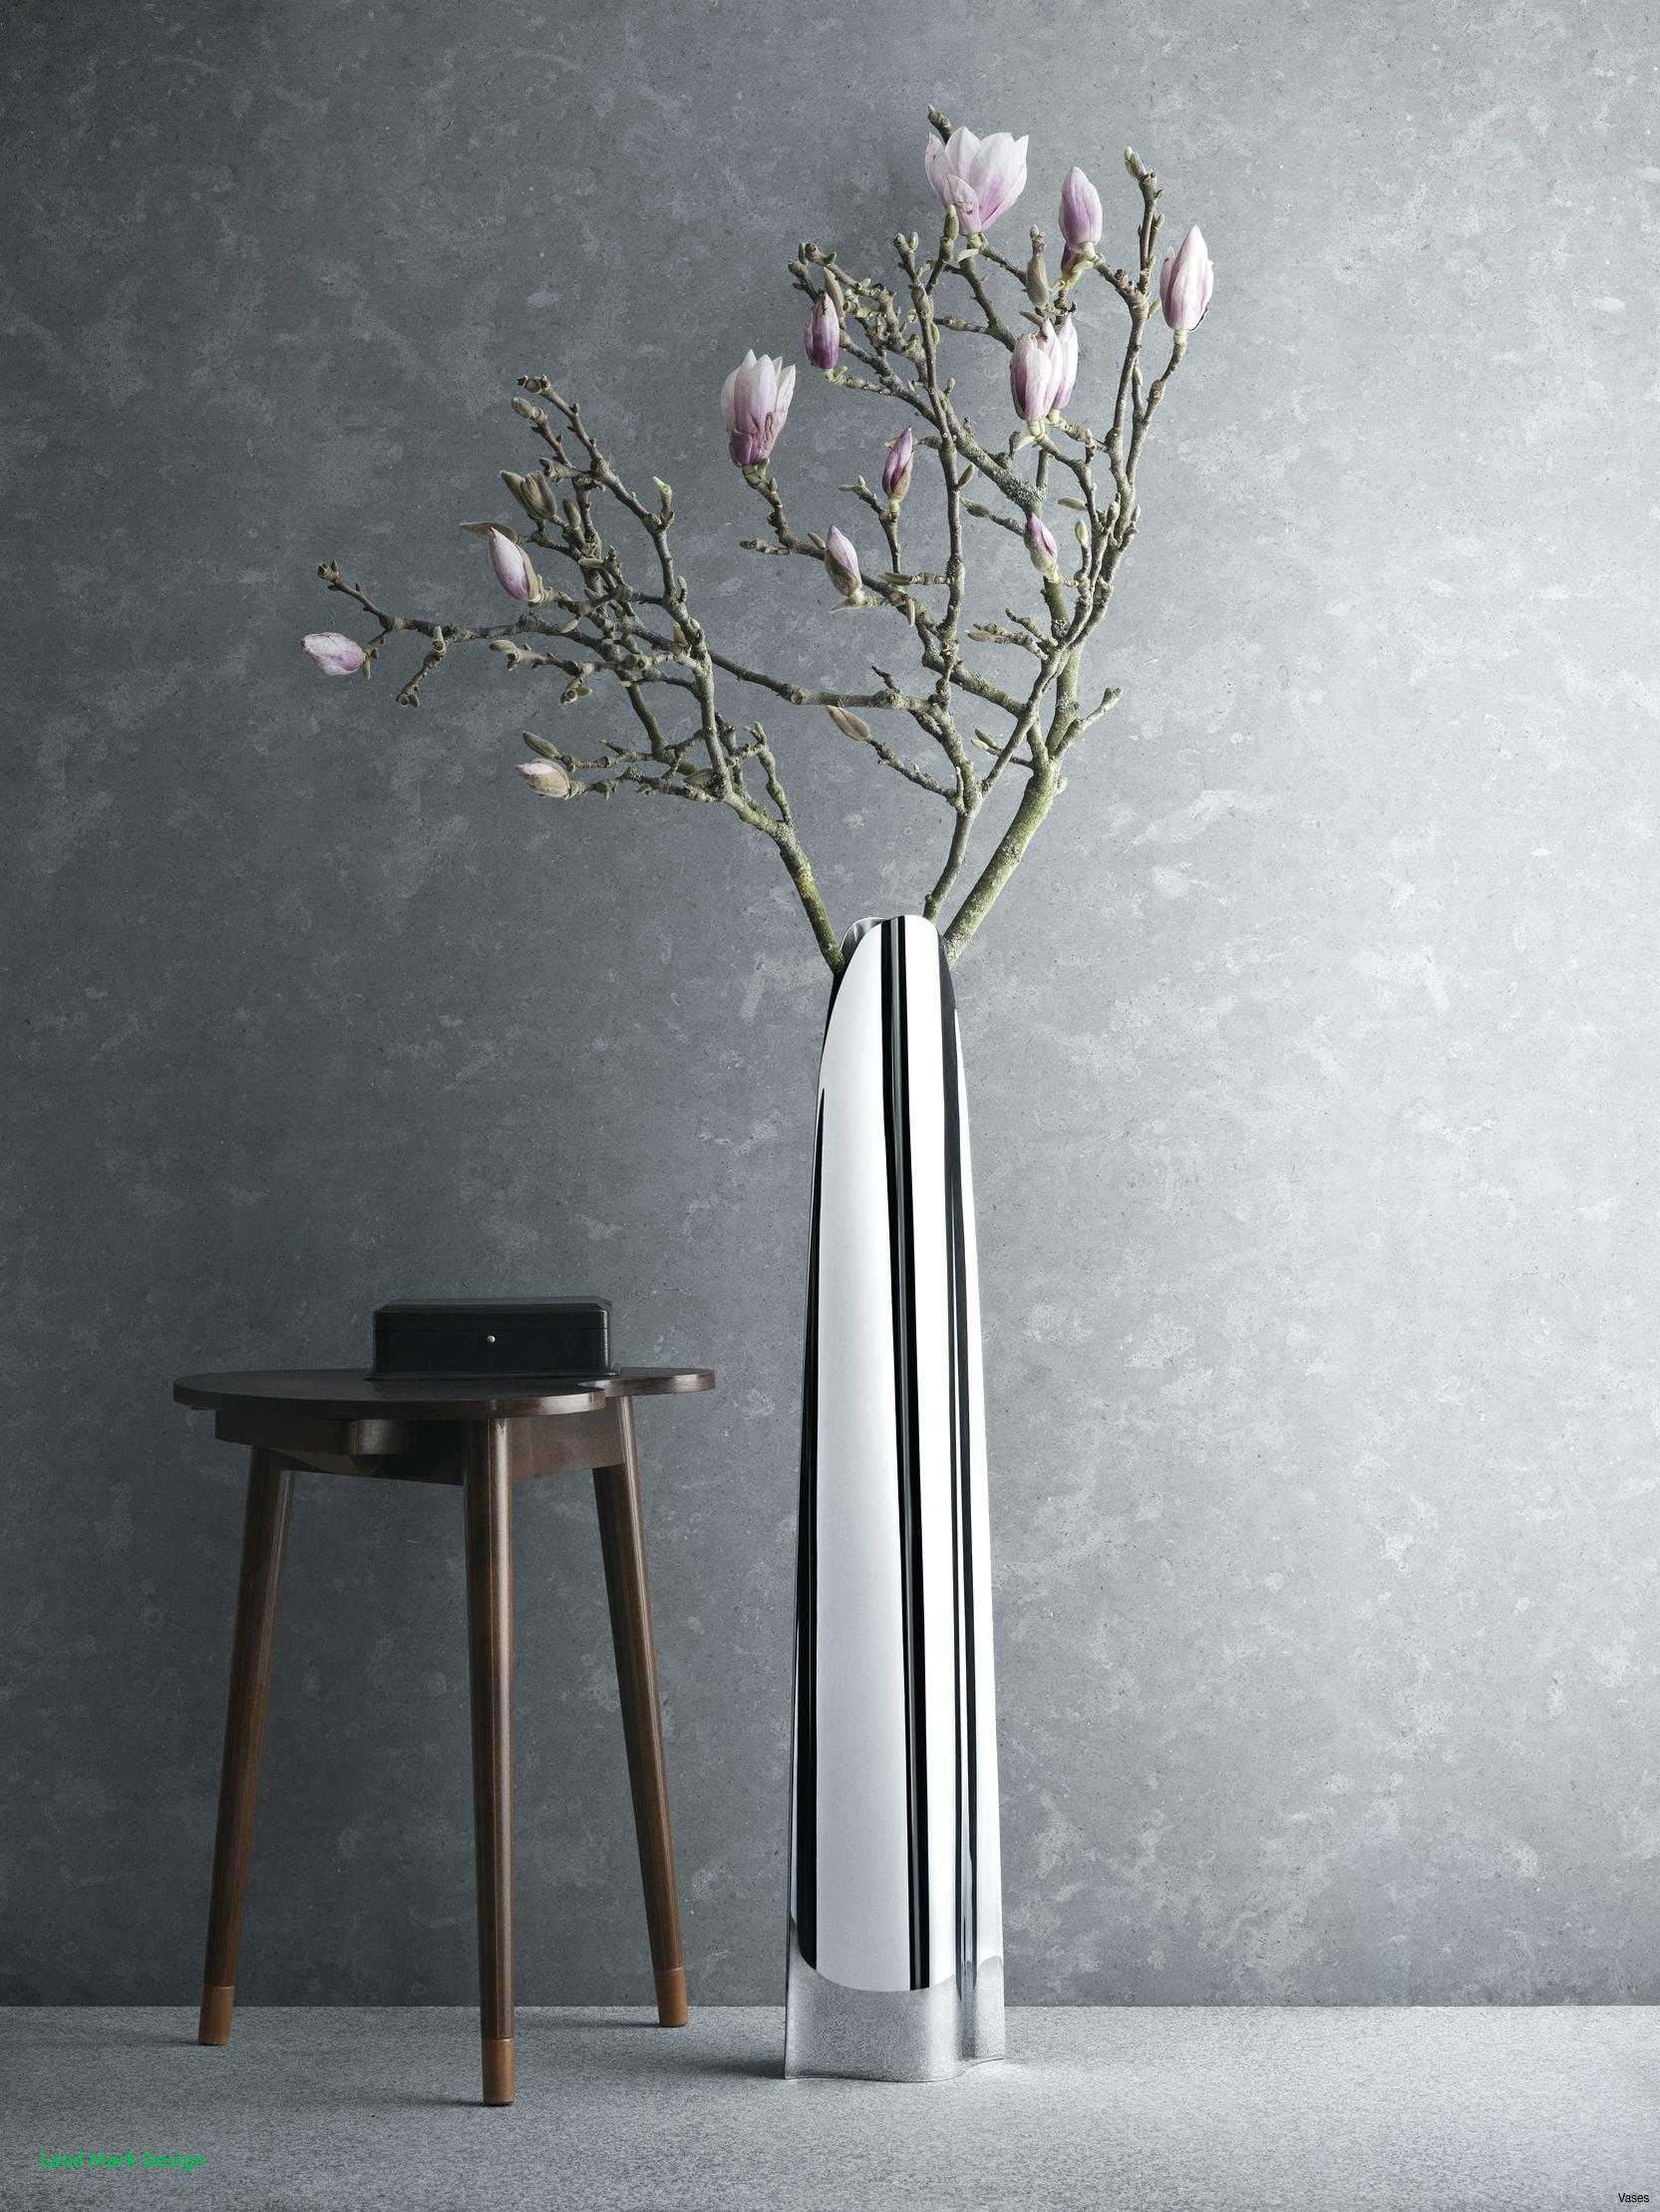 17 Recommended Branches for Vases 2024 free download branches for vases of tall vase with branches design home design throughout floor decor vase tall ideash vases contemporary fill a substantial with arrangement of led branches it